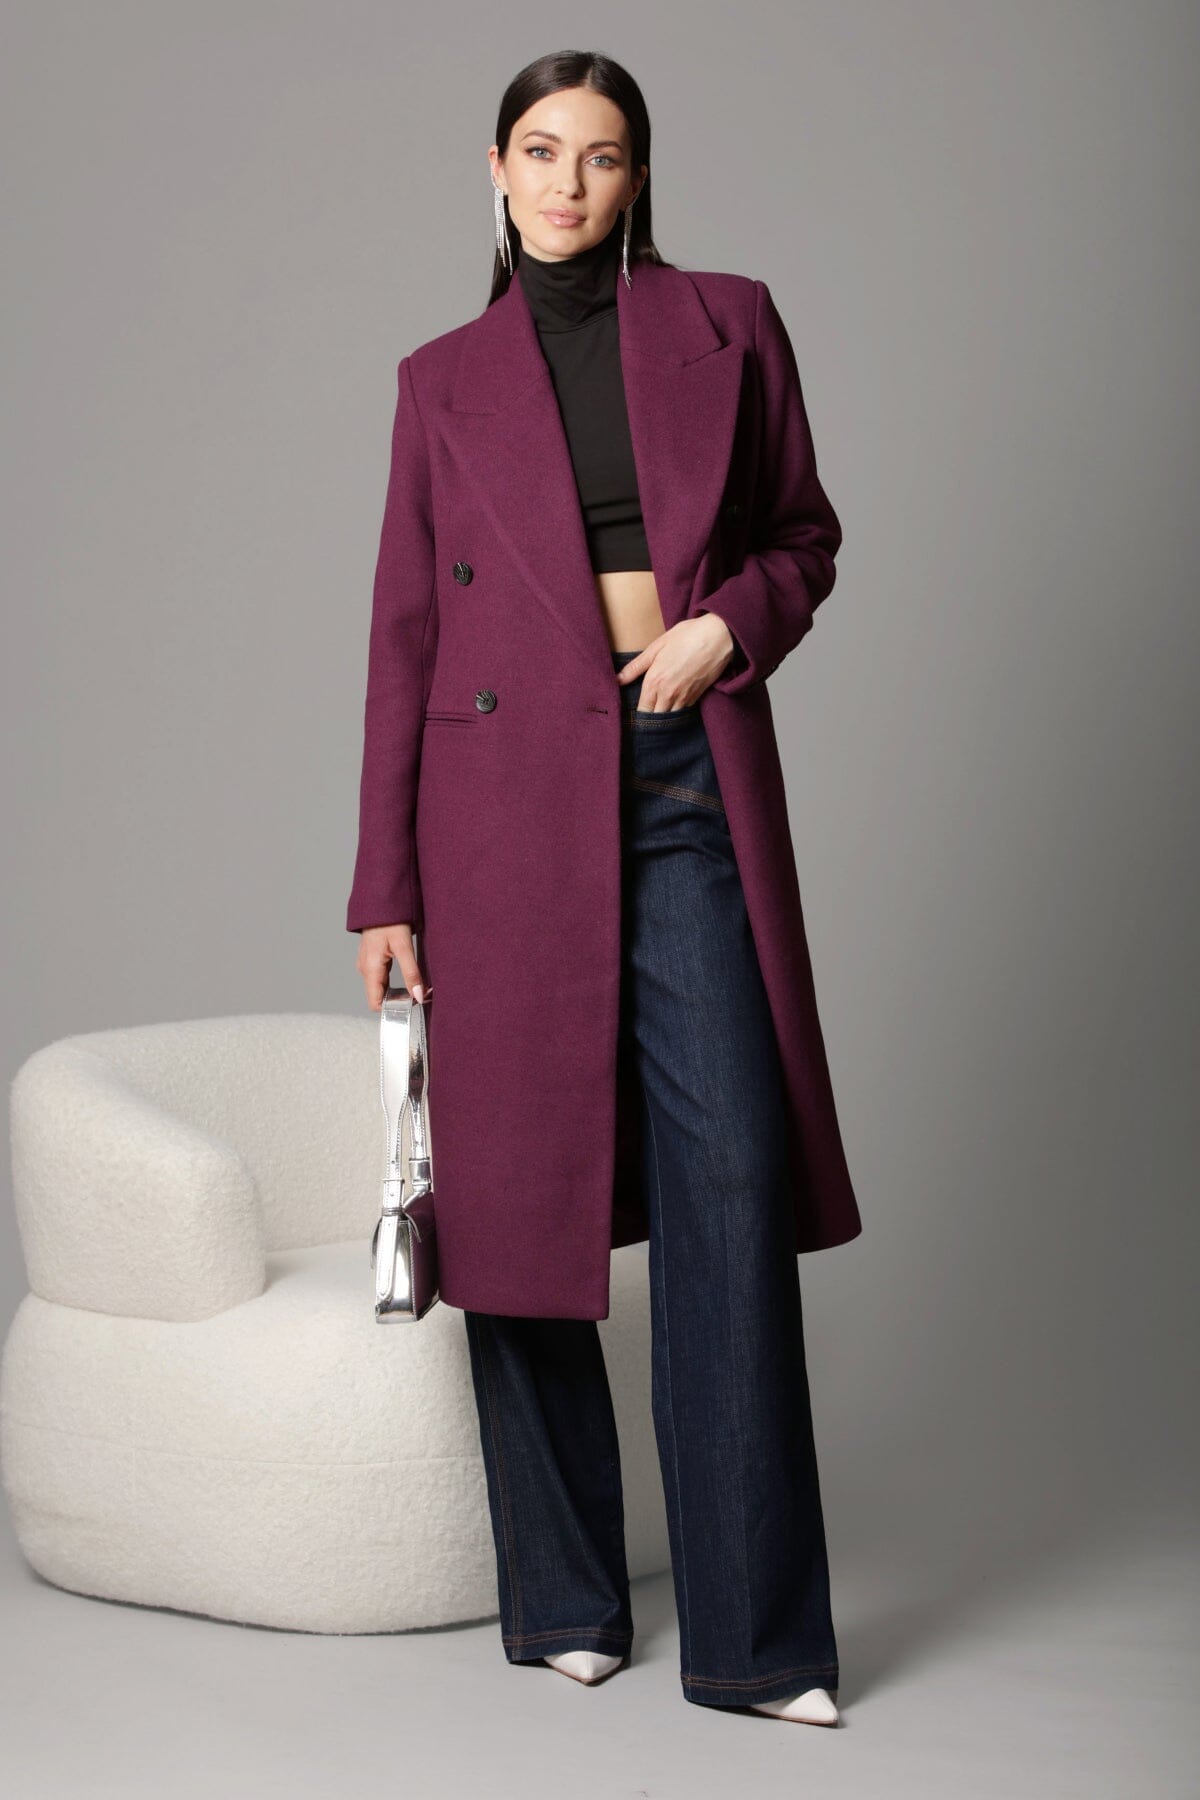 Women's dressy Tailored Double-Breasted Long Coat